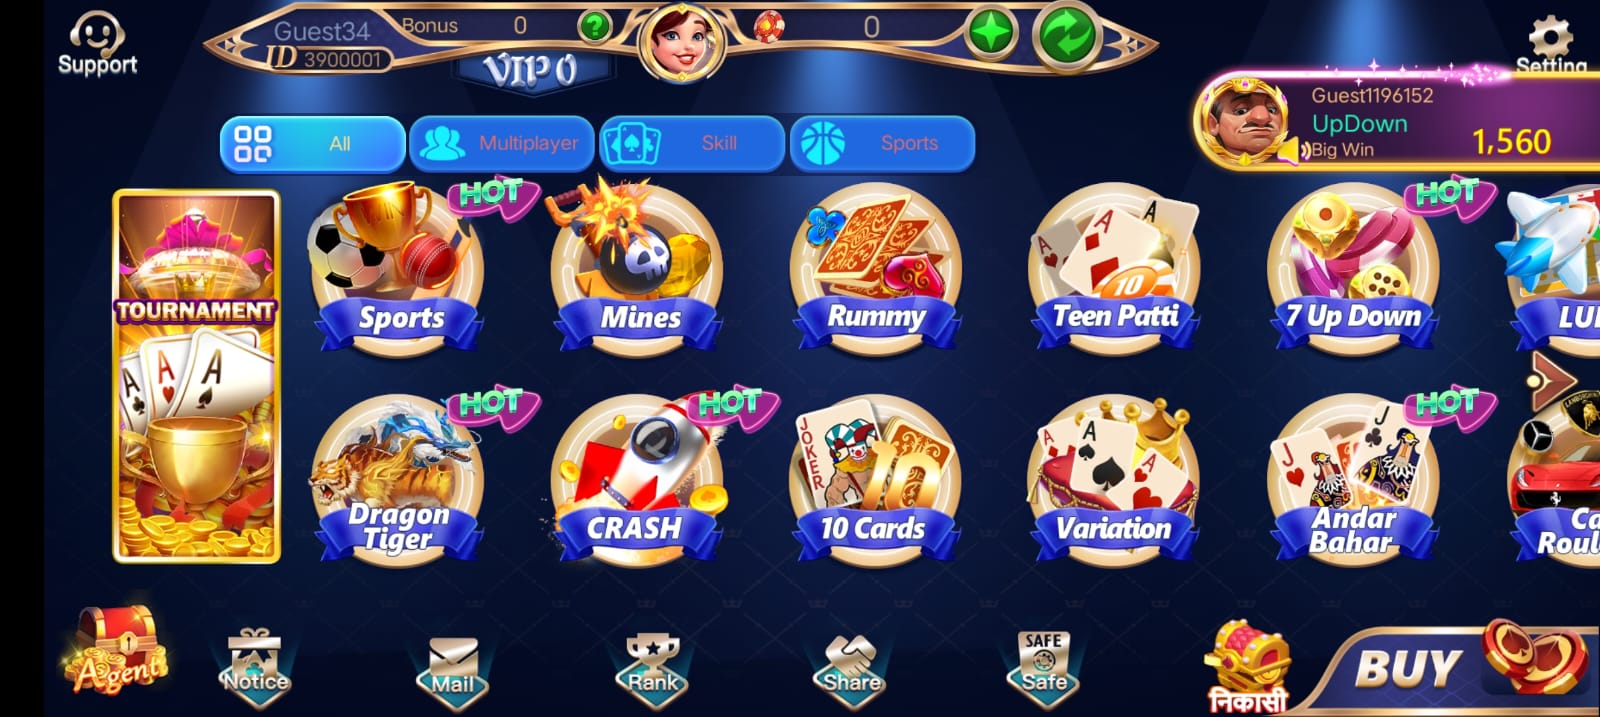 Available Games In Teen Patti Go Application